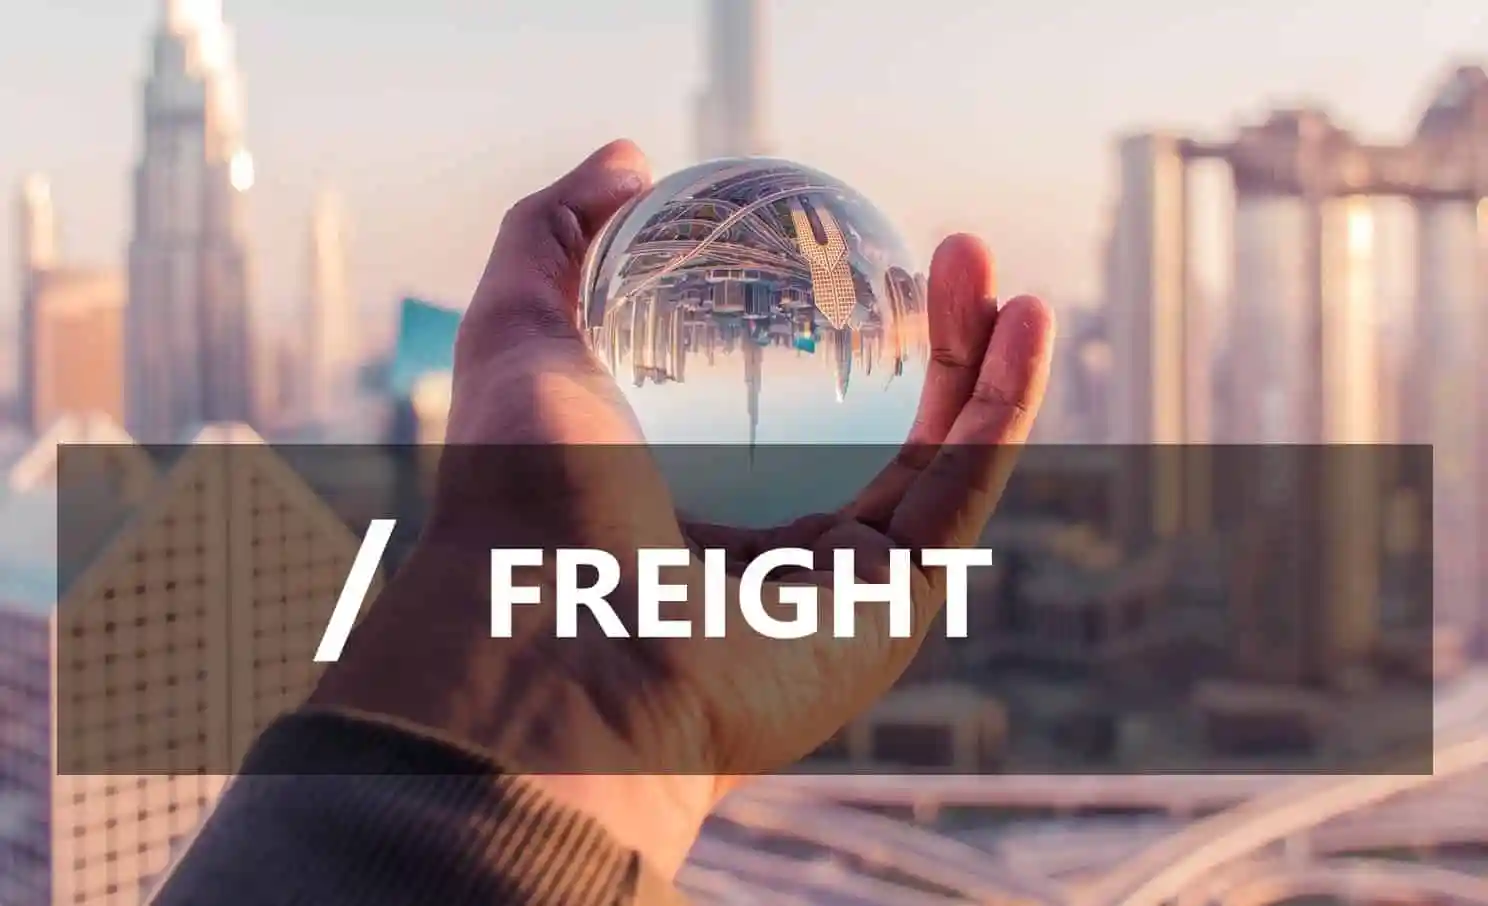 Best Way To Reduce Freight Costs in Supply Chain